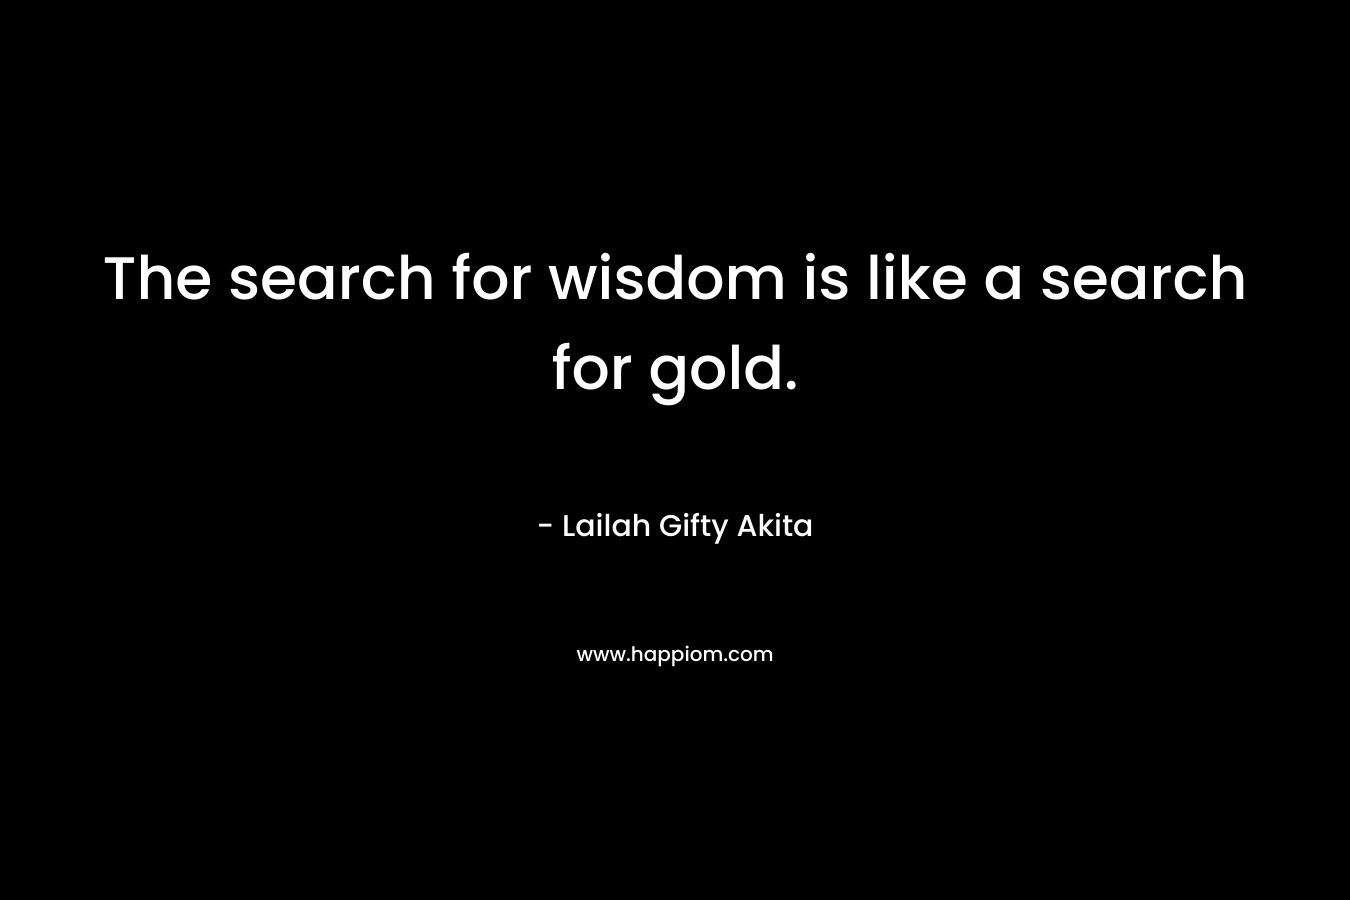 The search for wisdom is like a search for gold.